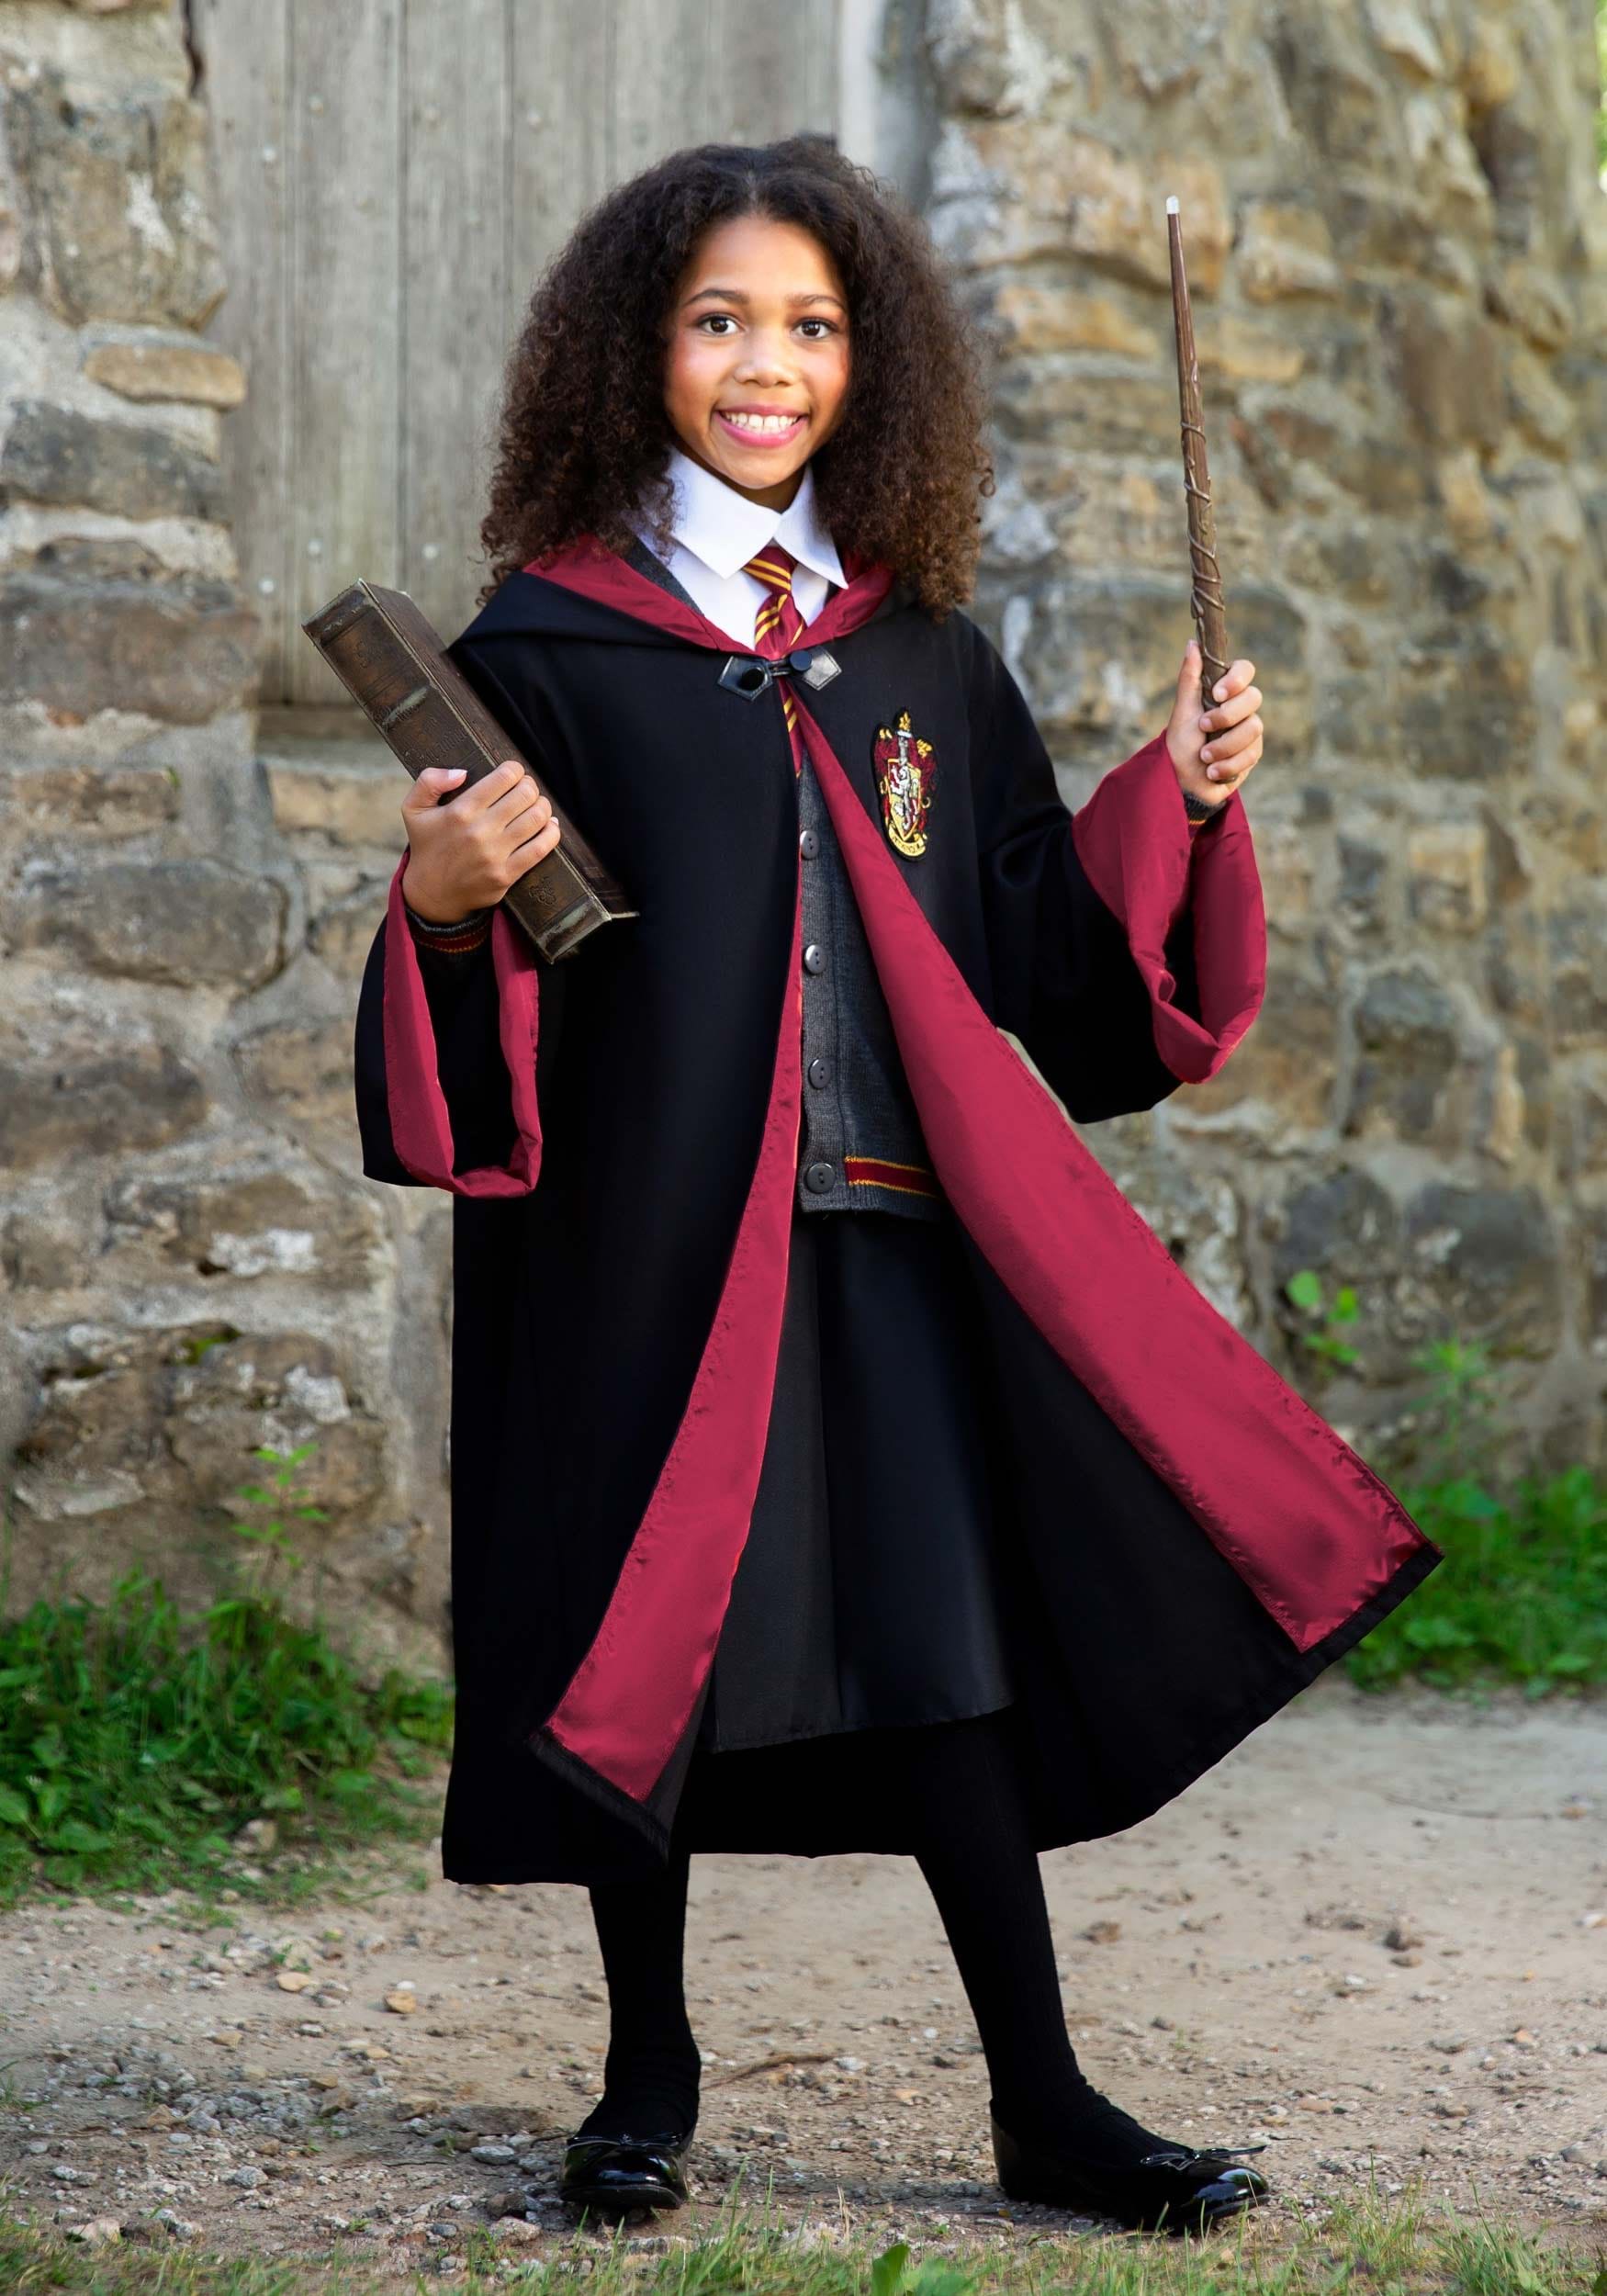 https://images.halloween.com/products/64157/1-1/deluxe-harry-potter-hermione-kids-costume-updated.jpg